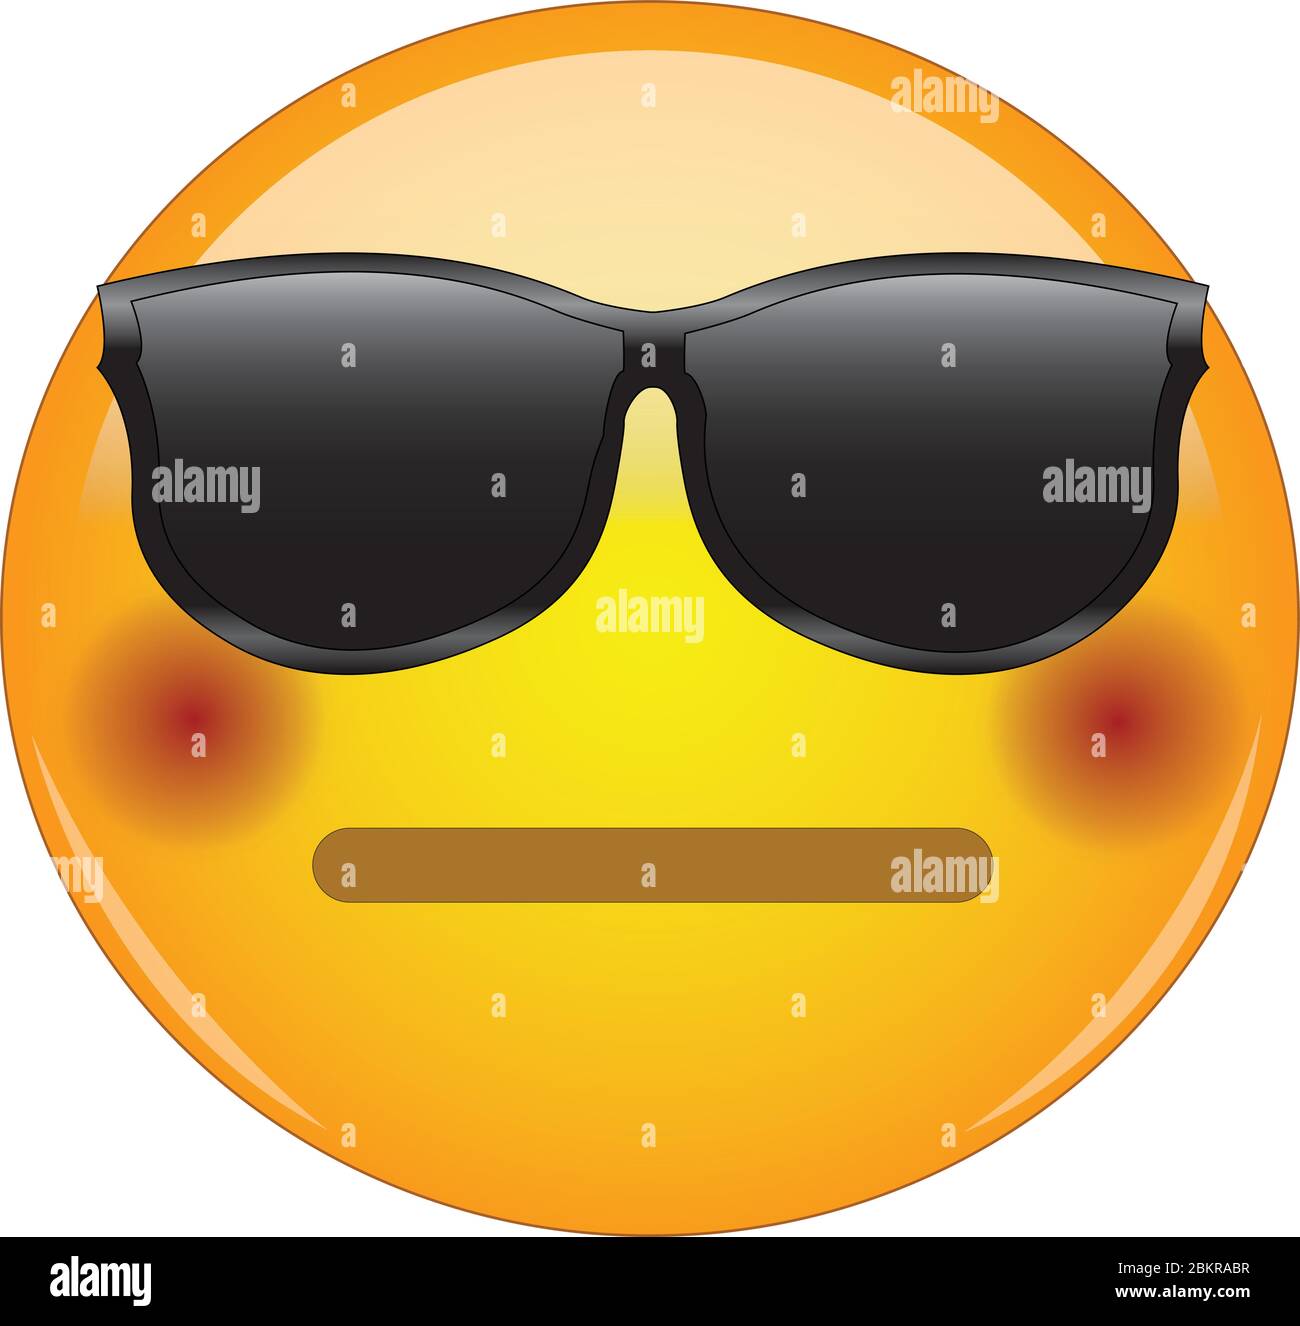 Cool flushed neutral face emoji. Awesome yellow face emoticon wearing sunglasses and having a small, closed mouth and blushing cheeks. Expressing emba Stock Vector